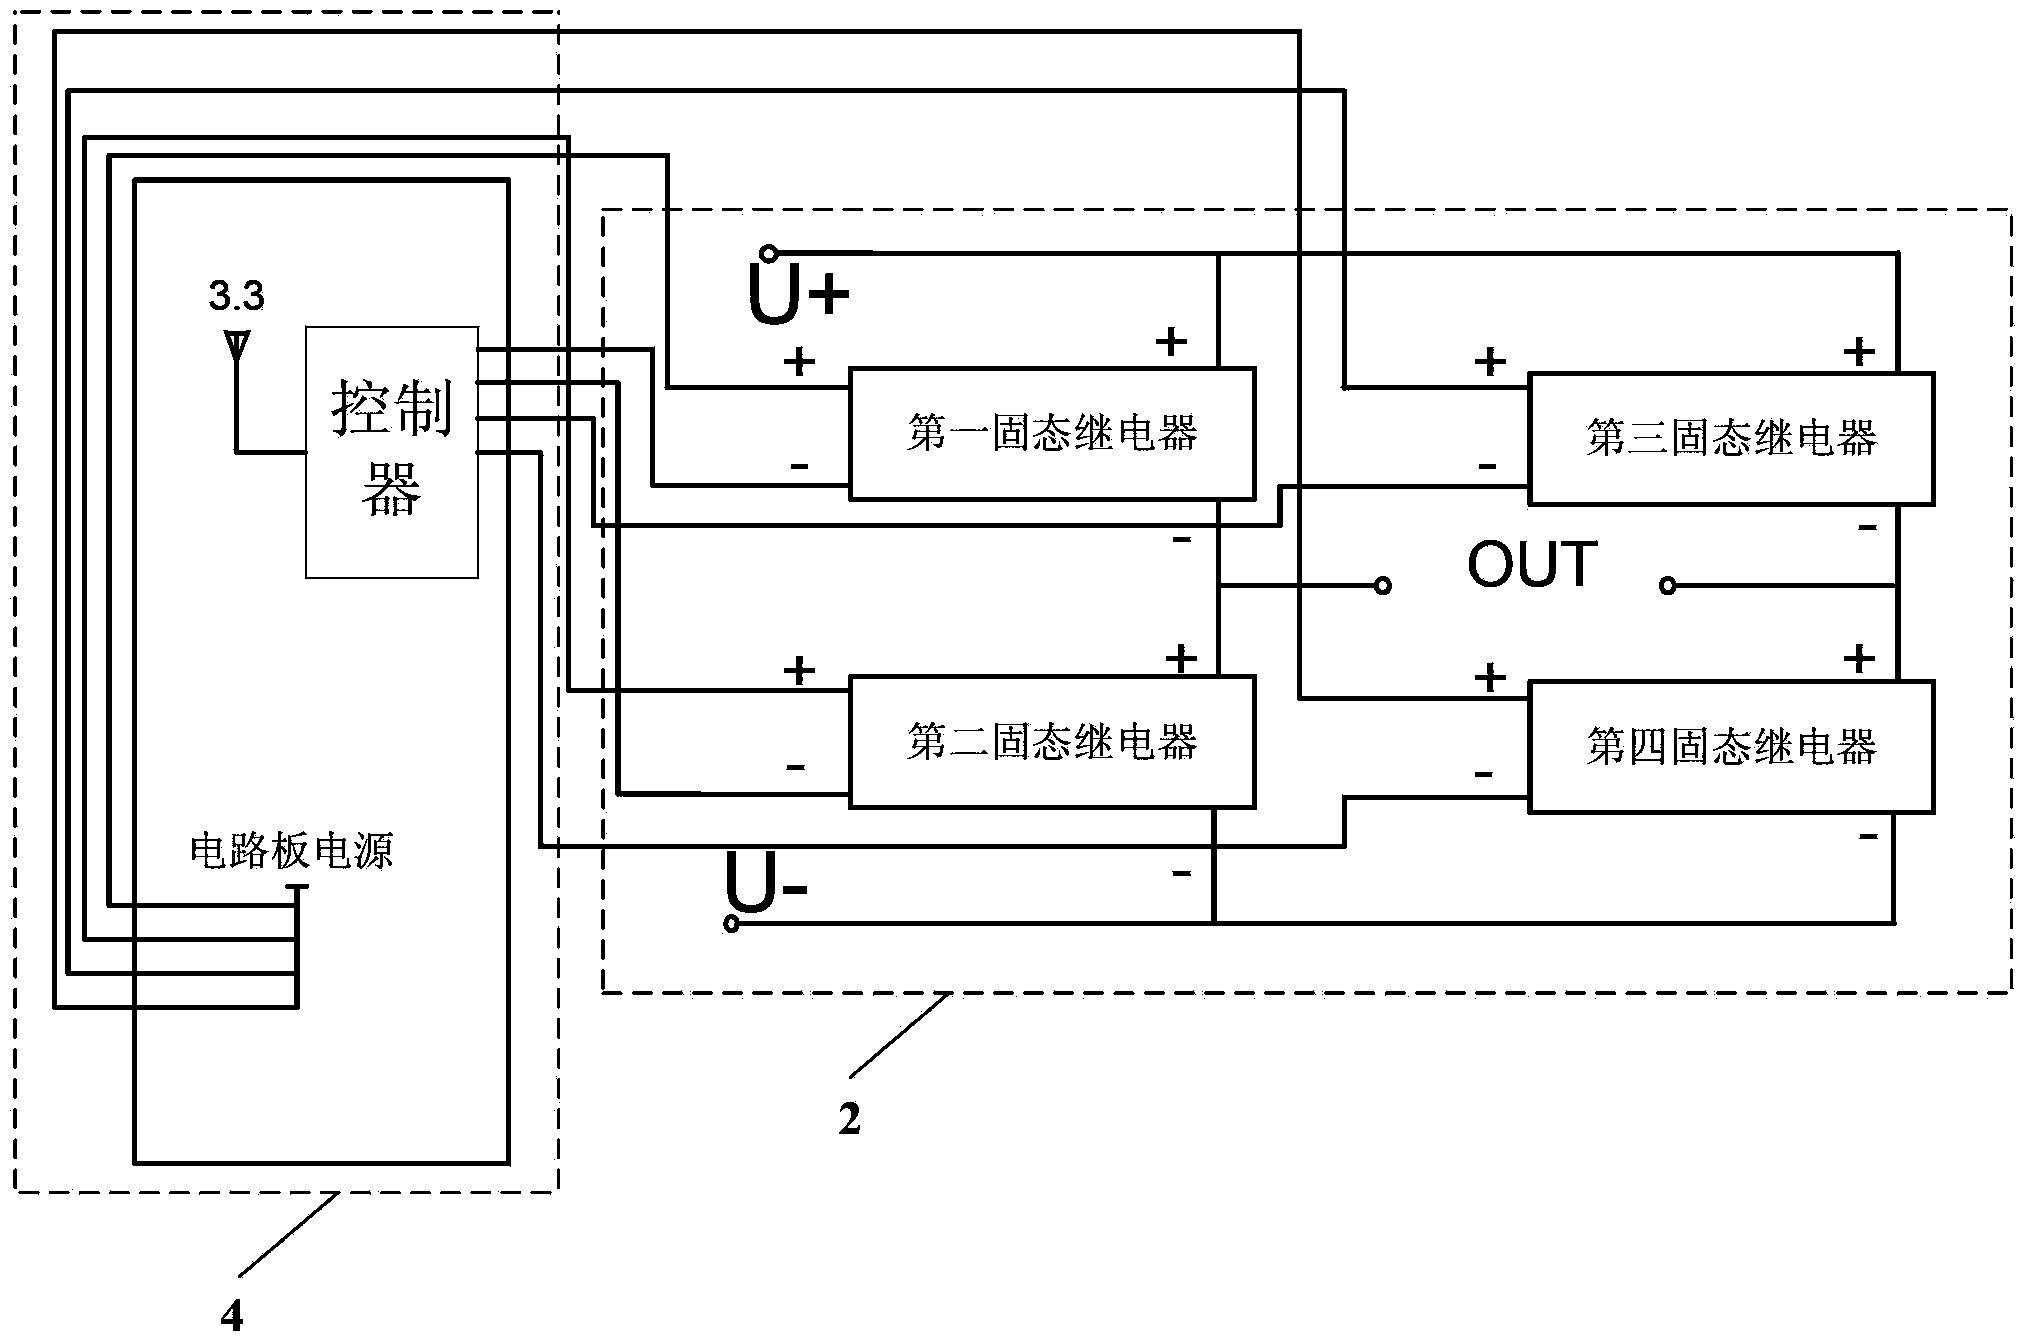 Low-voltage and high-current reversing device based on H bridge